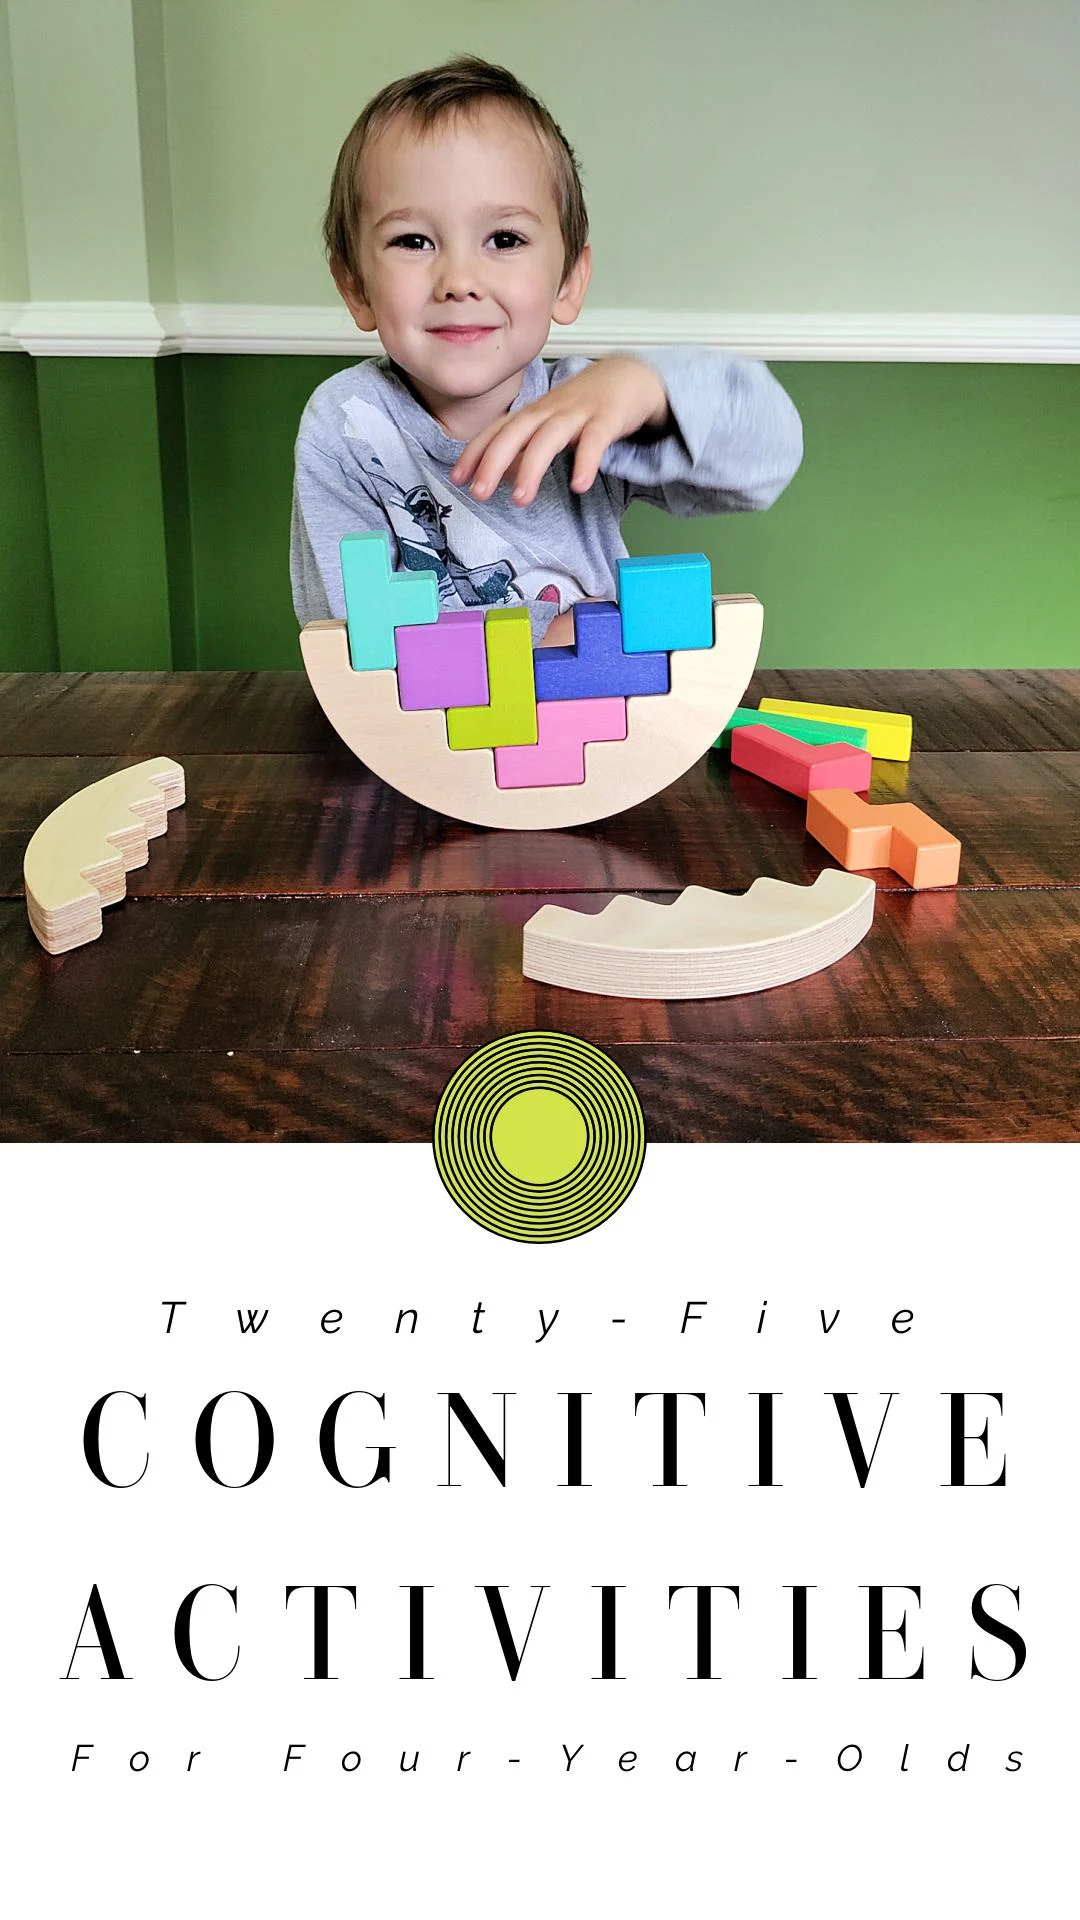 a four year old boy playing with a puzzle with a text overlay that says "twenty-five cognitive activities for four-year-olds."